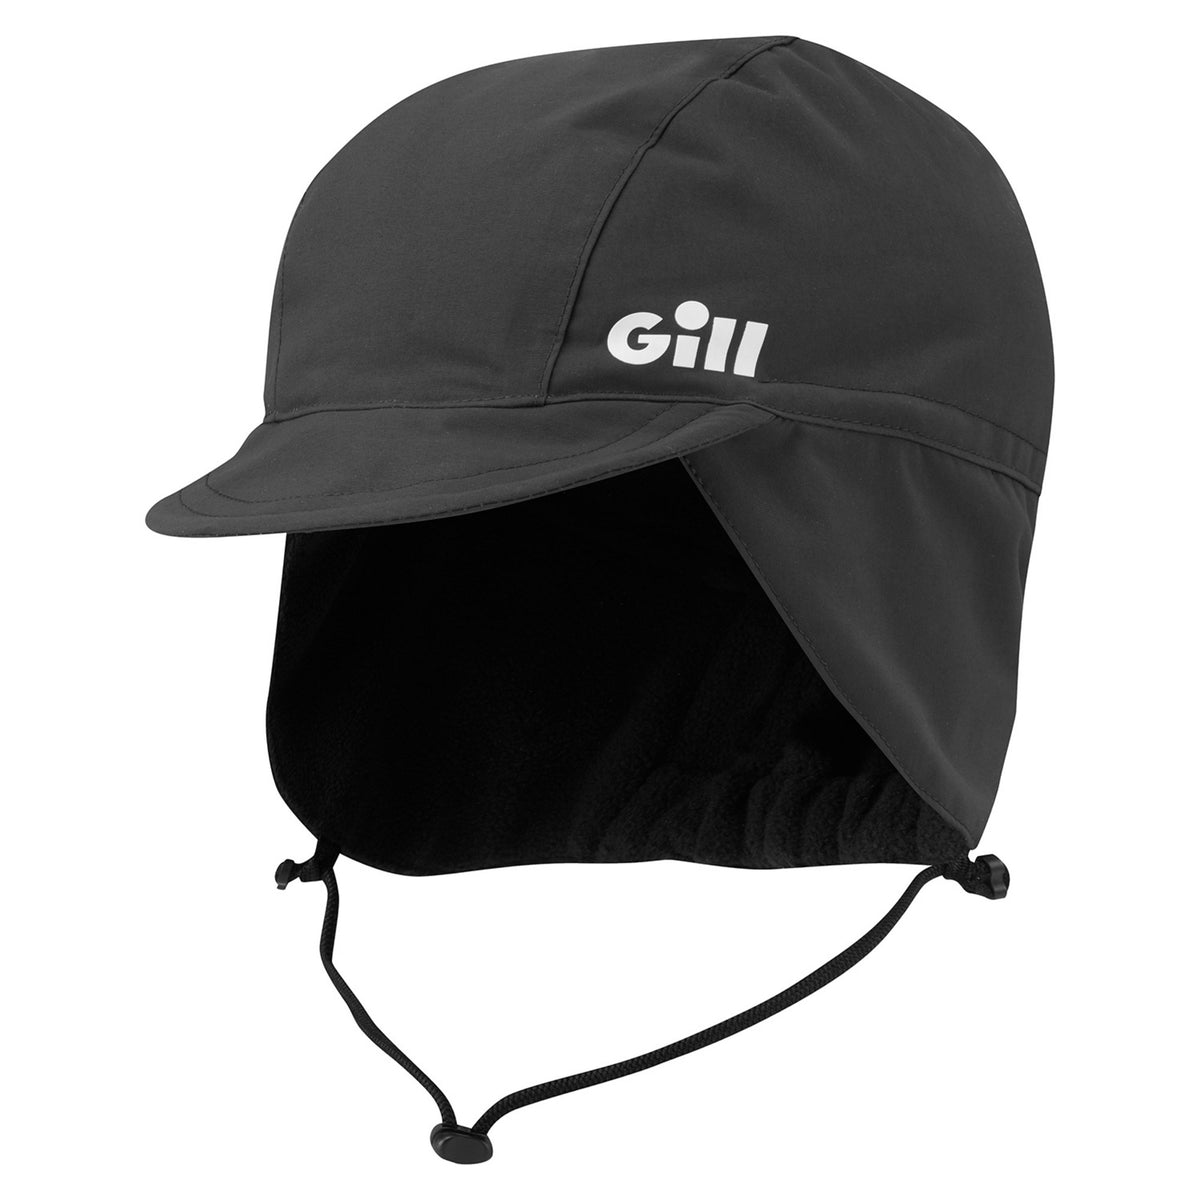 GILL Offshore Hat - One Size